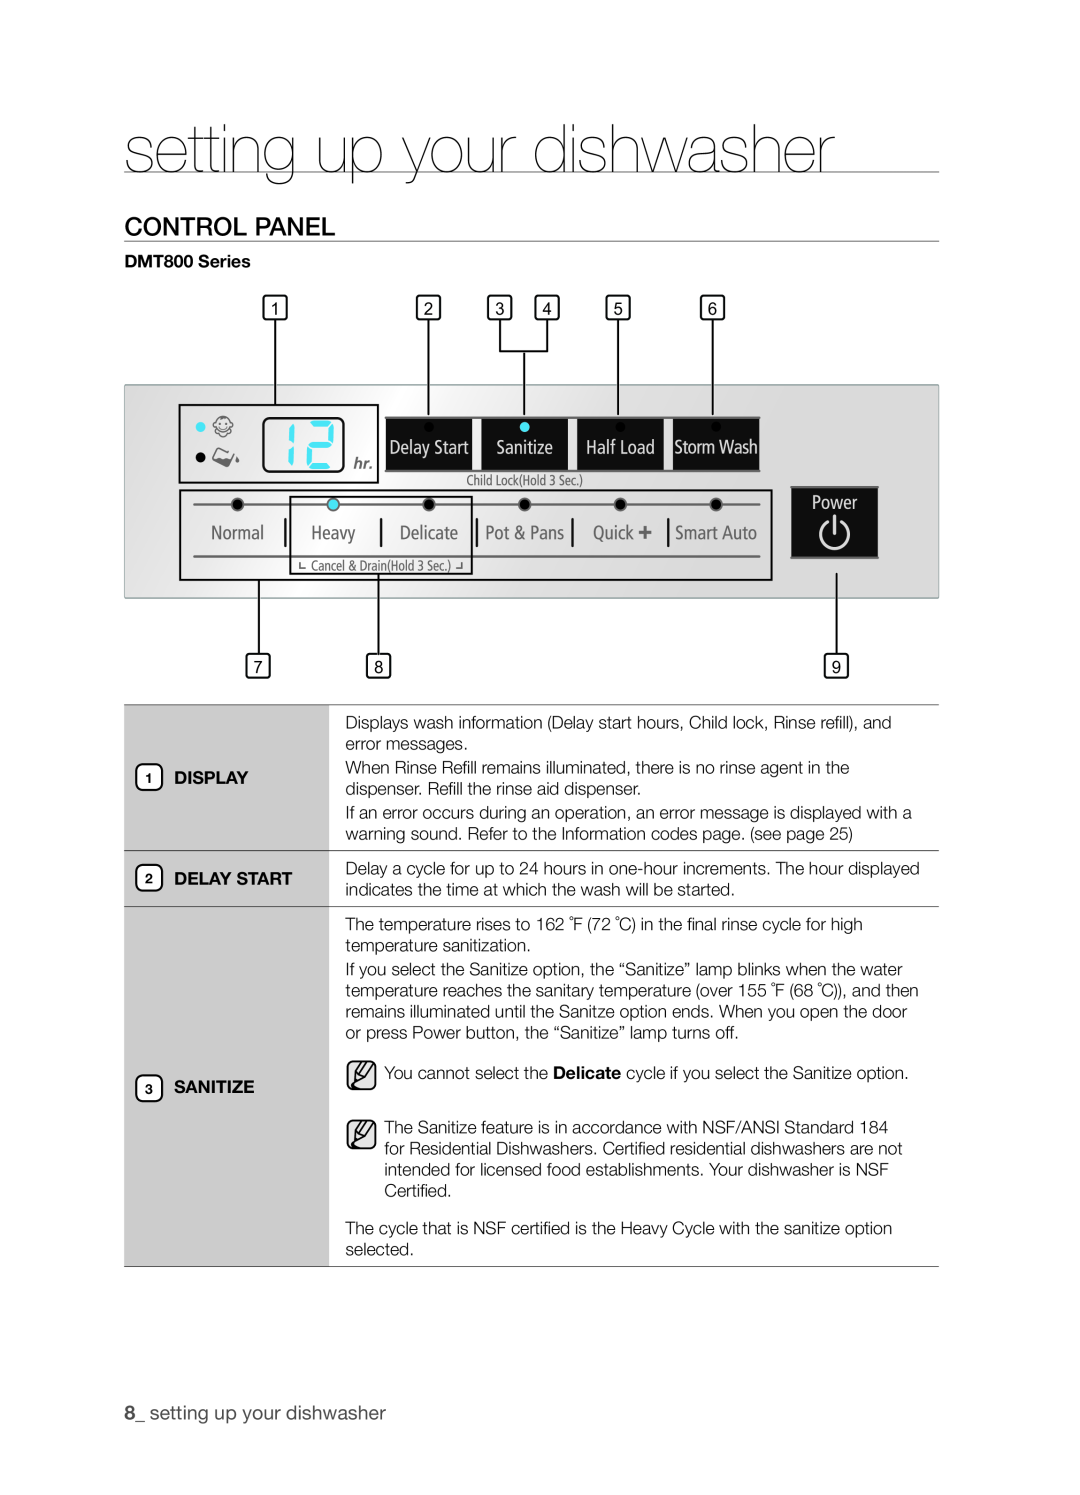 Samsung DMT800 Series, DMT800RHS manual Control panel, setting up your dishwasher 